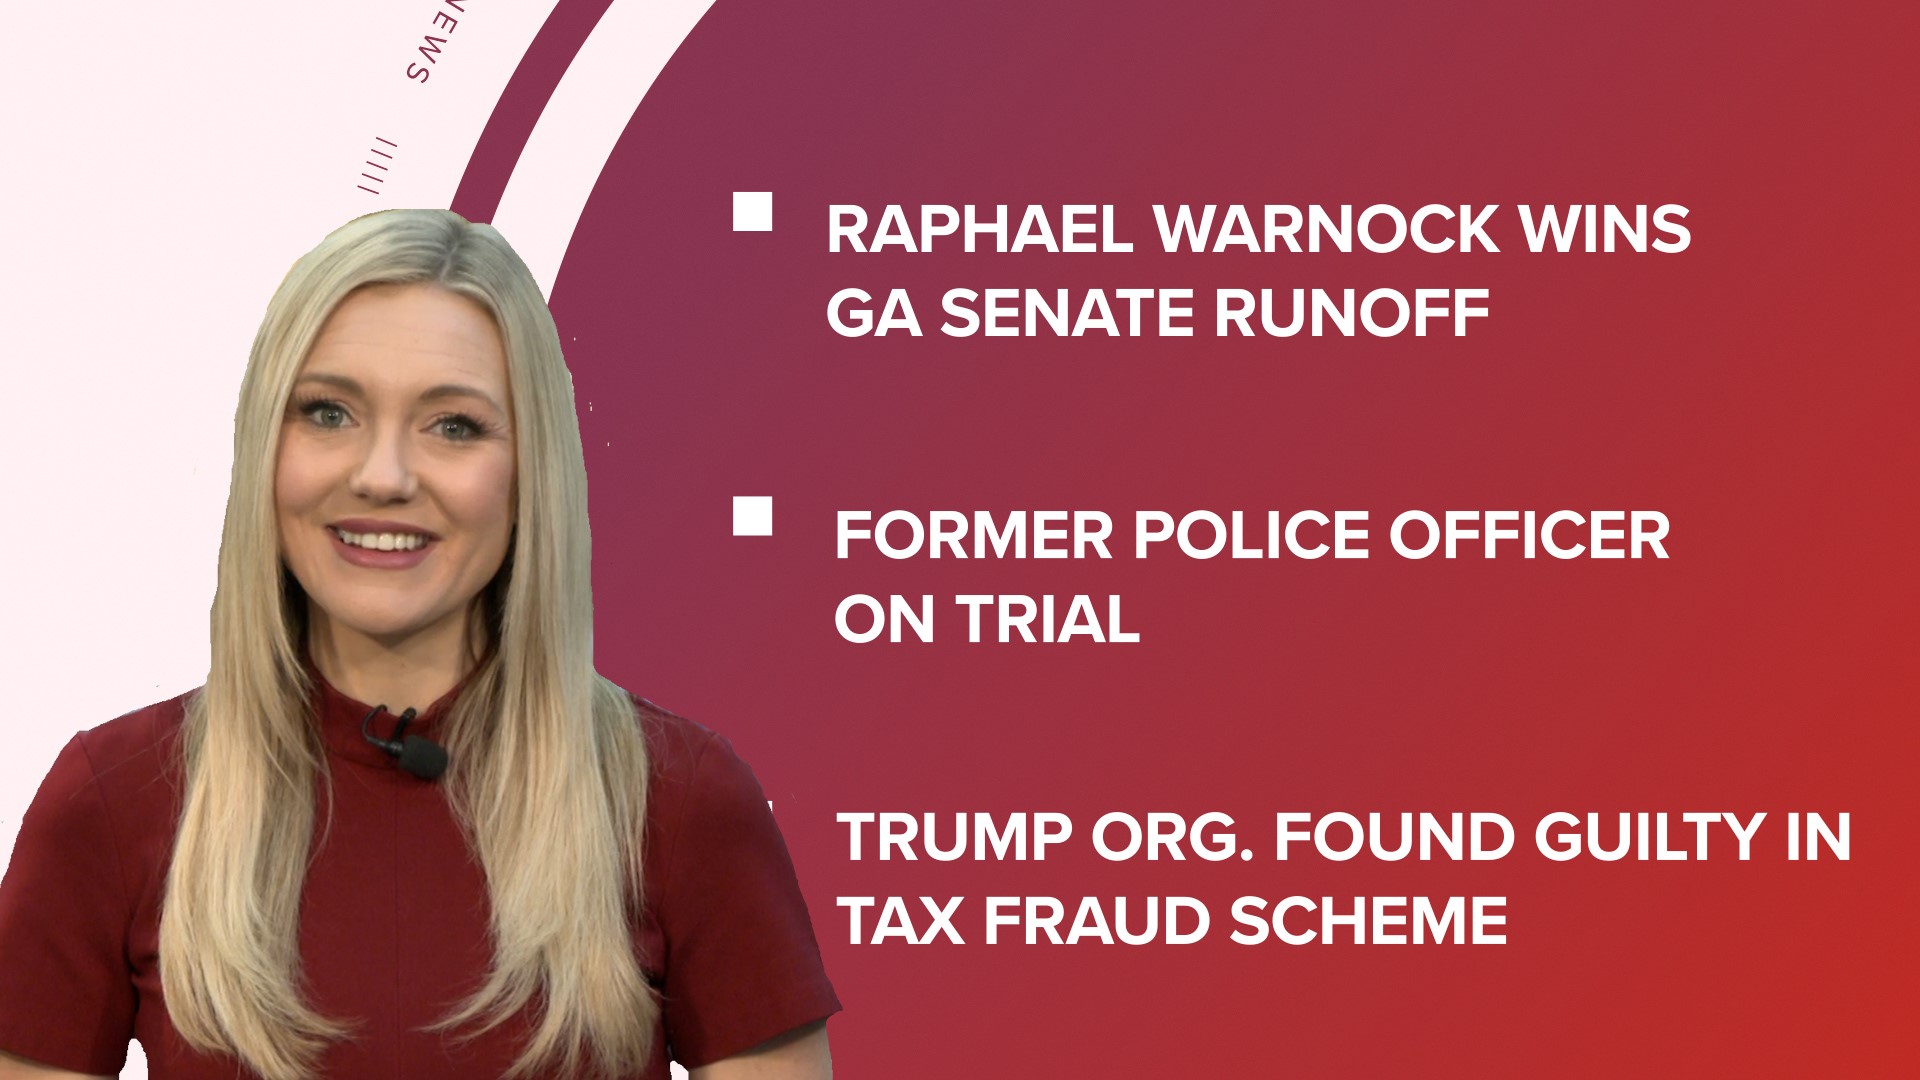 A look at what is happening in the news from Sen. Raphael Warnock winning senate seat in GA to Trump organization found guilty of criminal tax fraud.